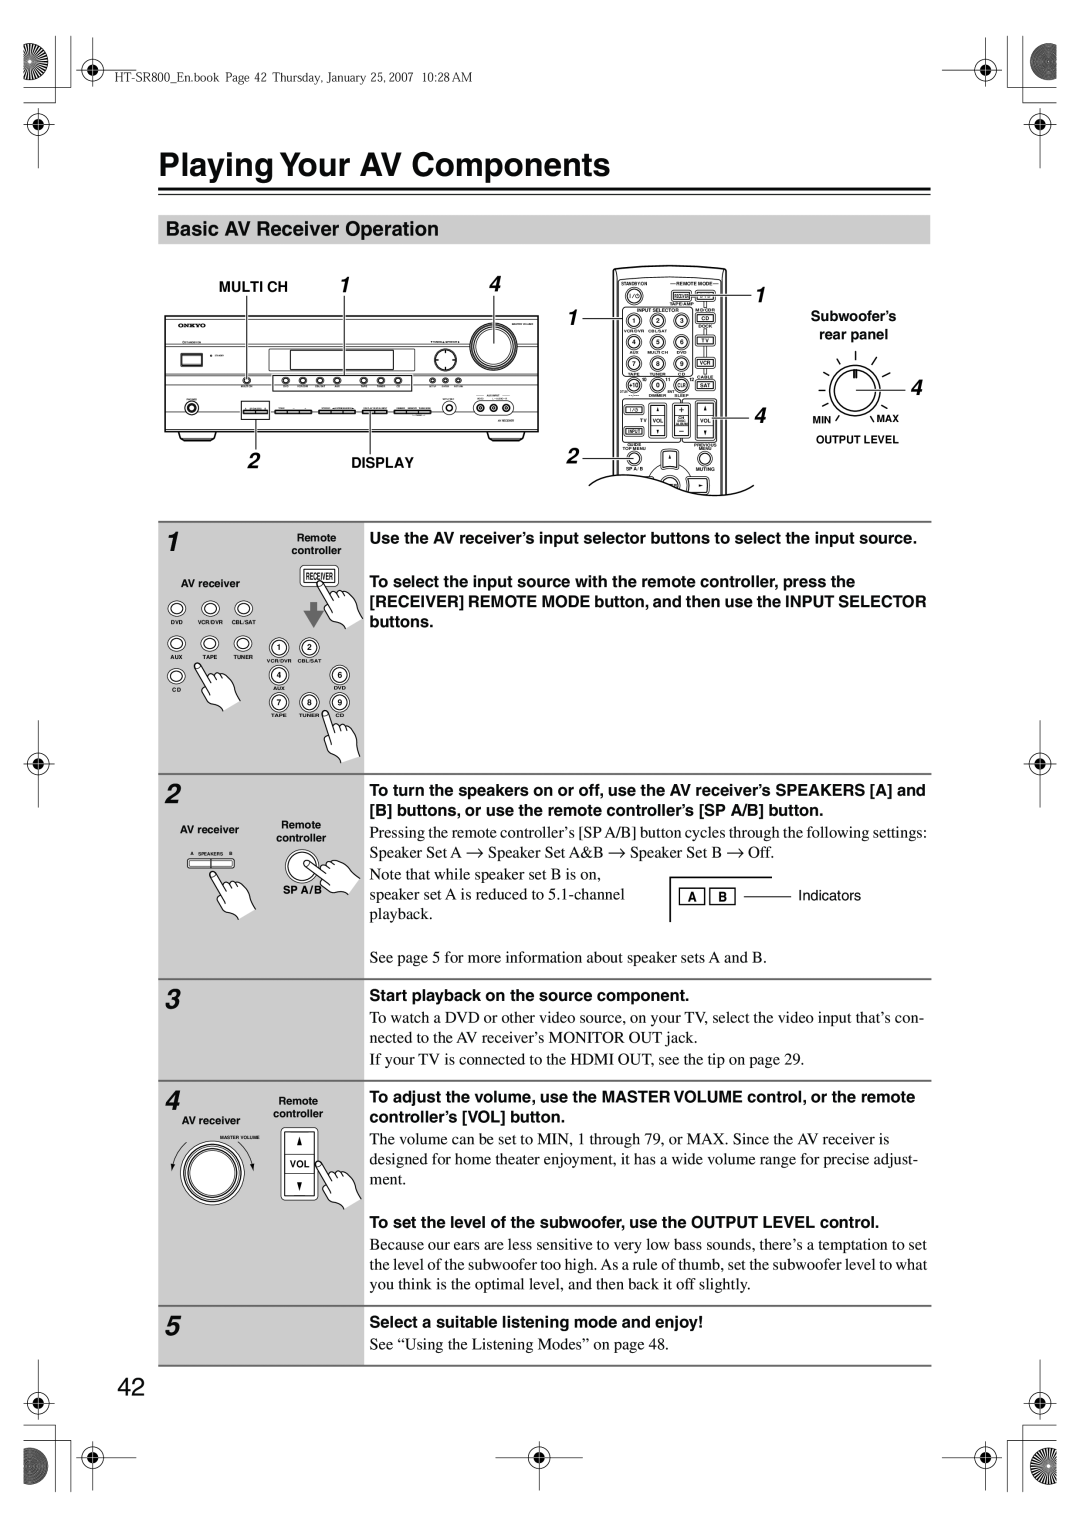 Onkyo HT-SR800 Playing Your AV Components, Basic AV Receiver Operation, See “Using the Listening Modes” on page 